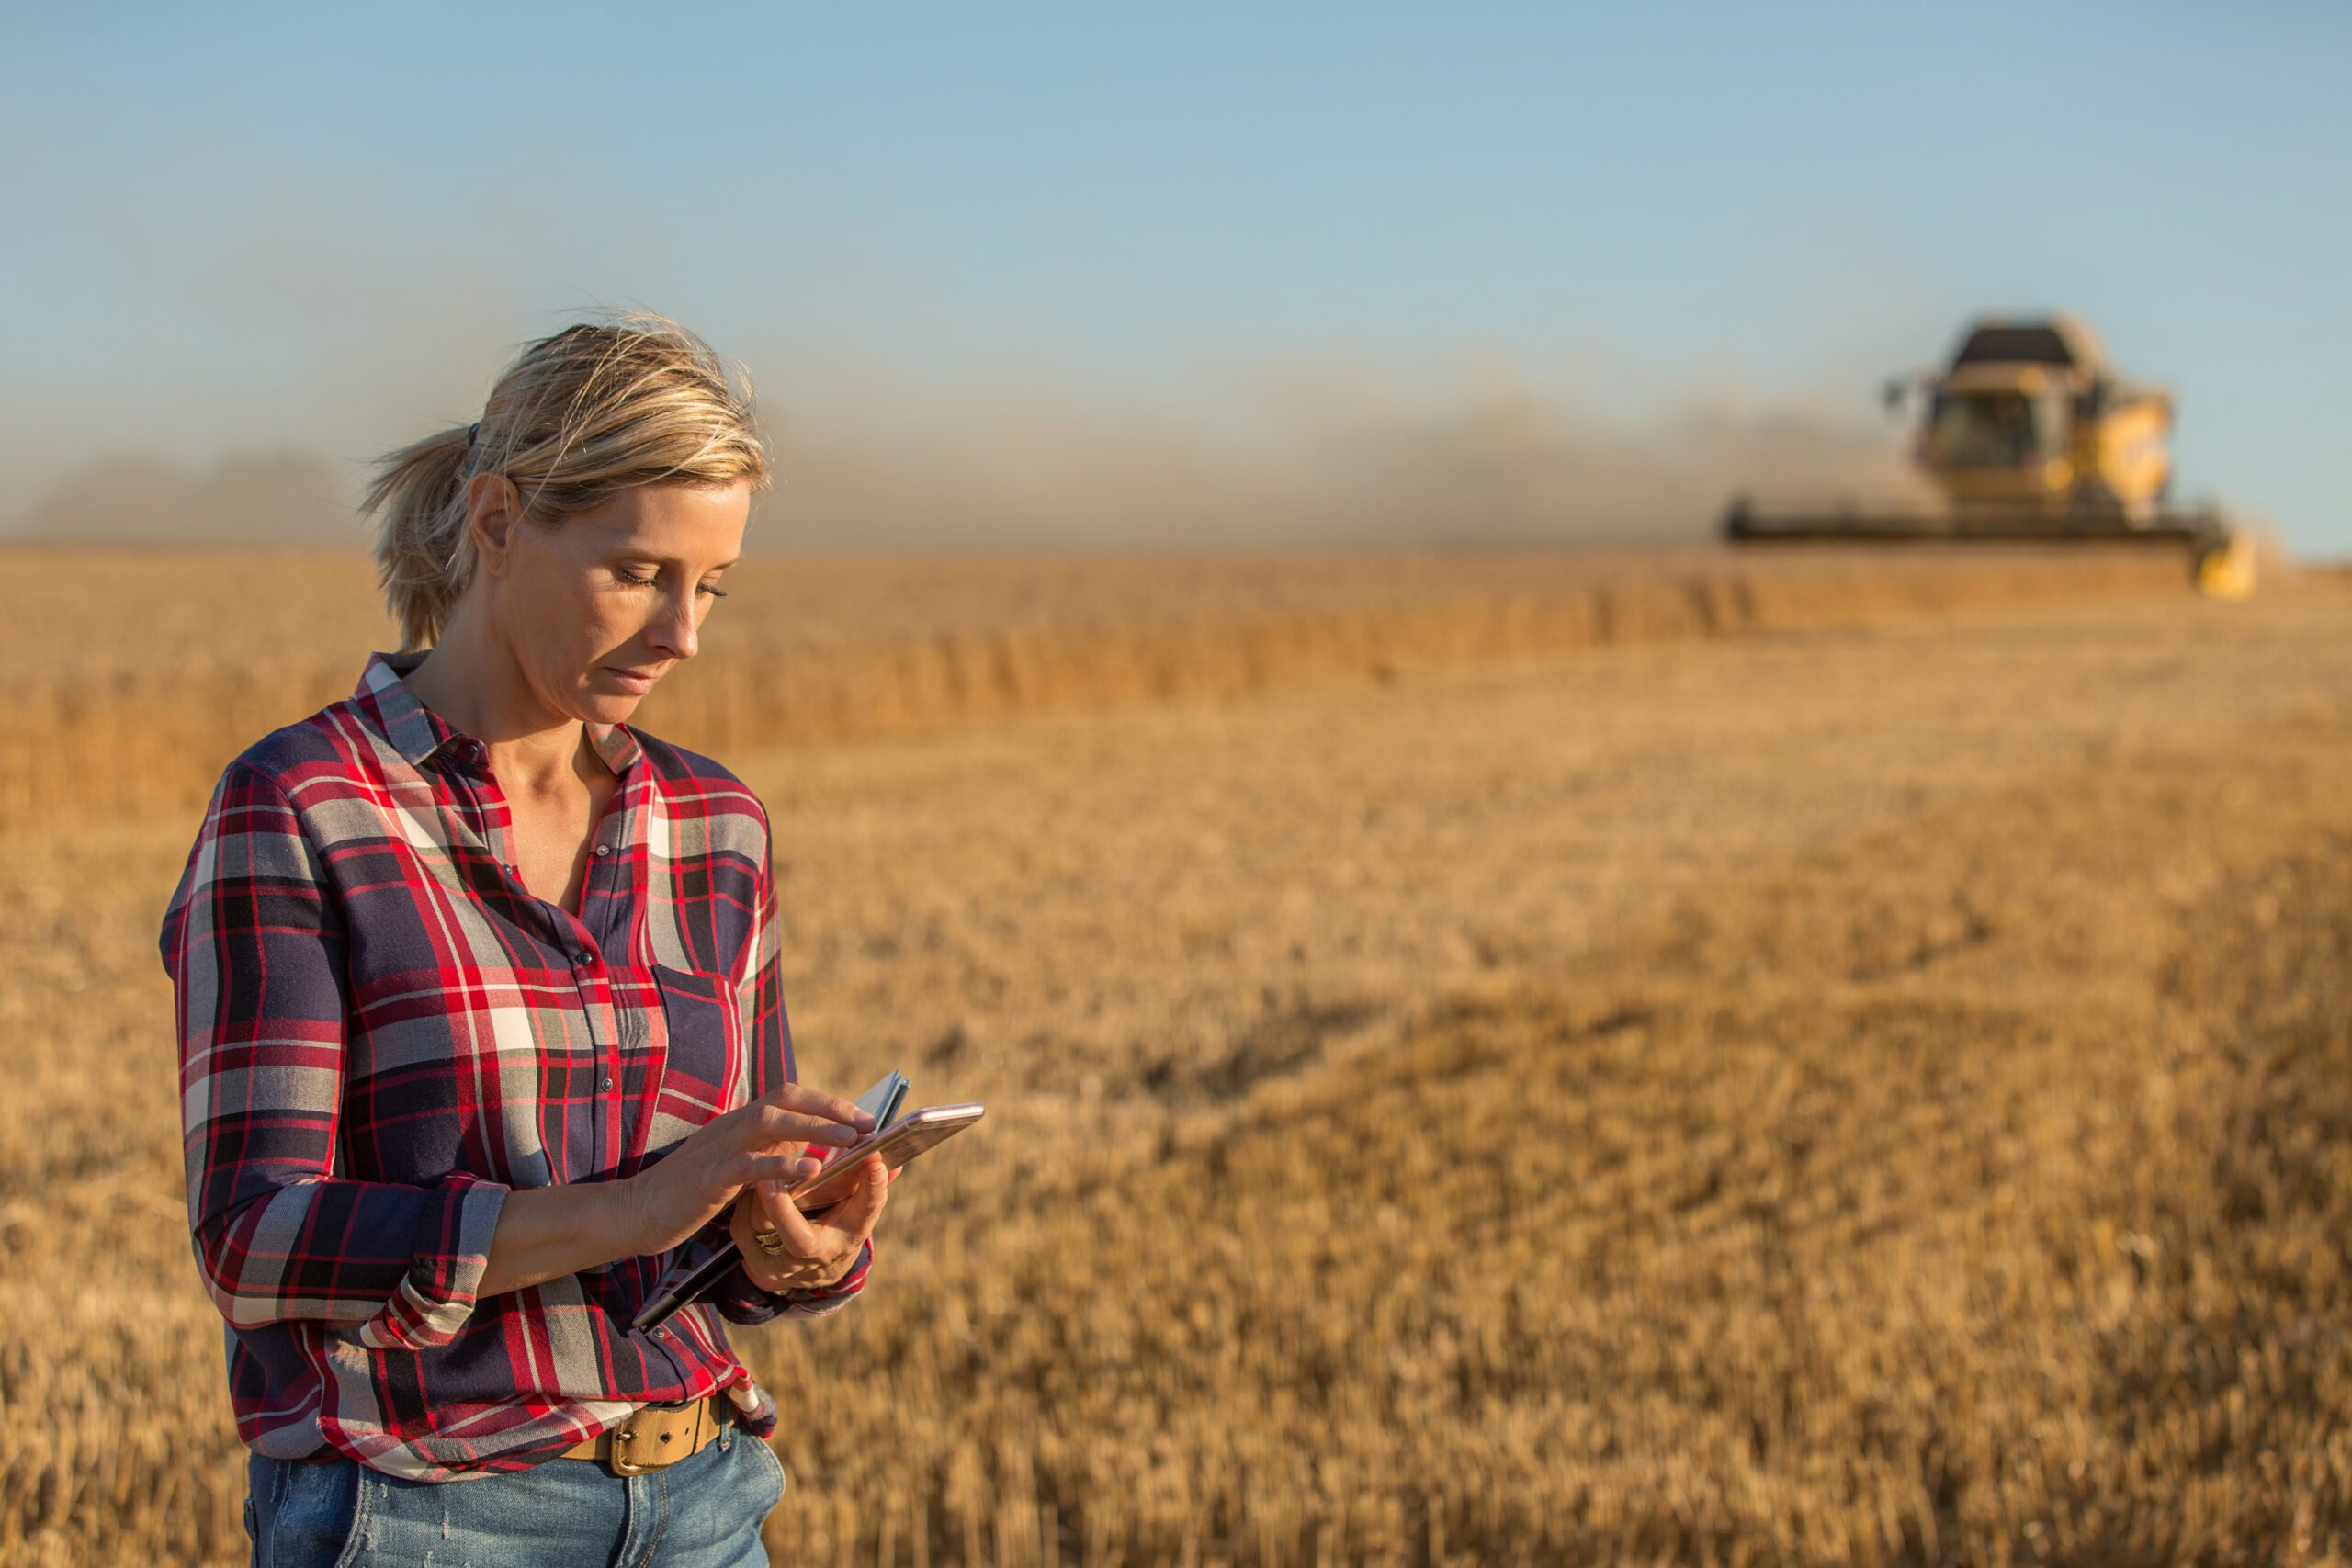 A young farmer looks at his phone walking away from a truck driver in the field.